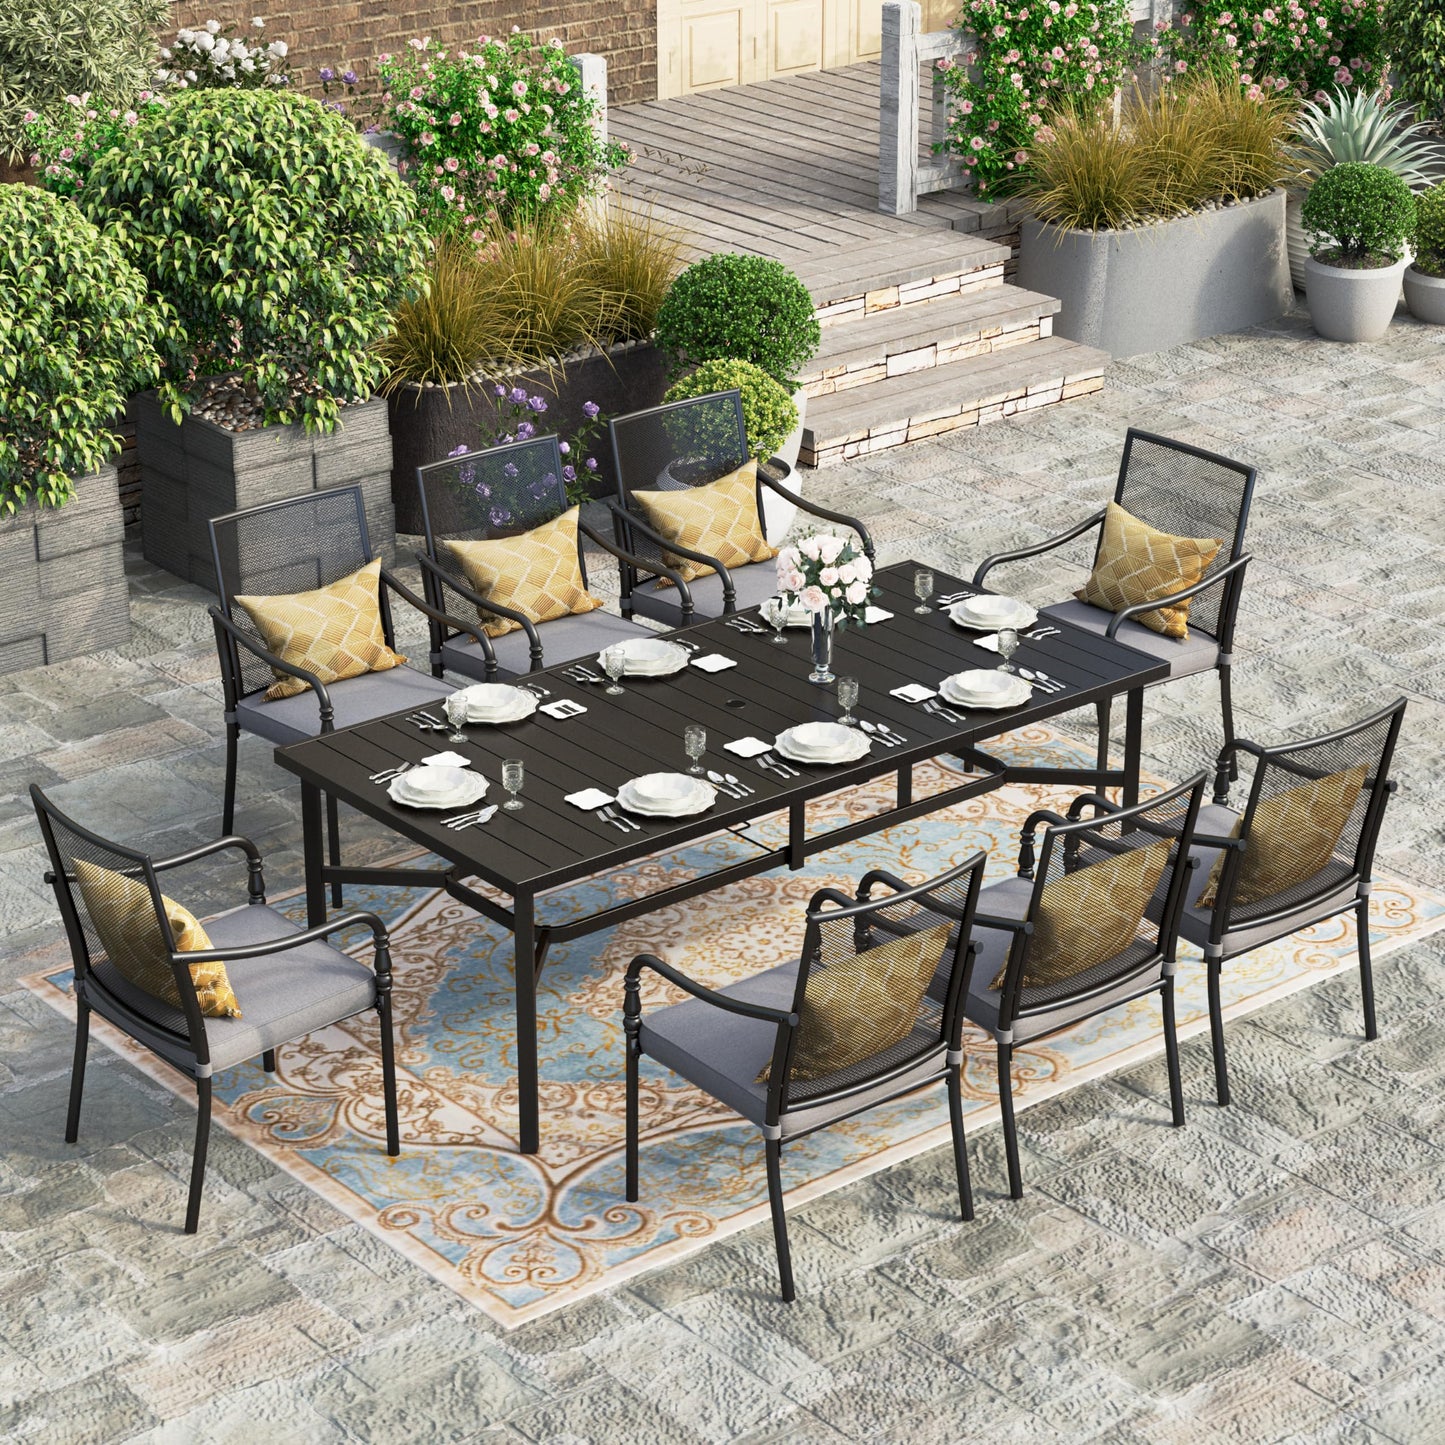 HERA'S HOUSE Patio Dining Set Outdoor Furniture, 83" Rectangle Table with 8 Cushioned Armrest Chairs, 8 Person Patio Table and Chairs for Backyard Garden Lawn